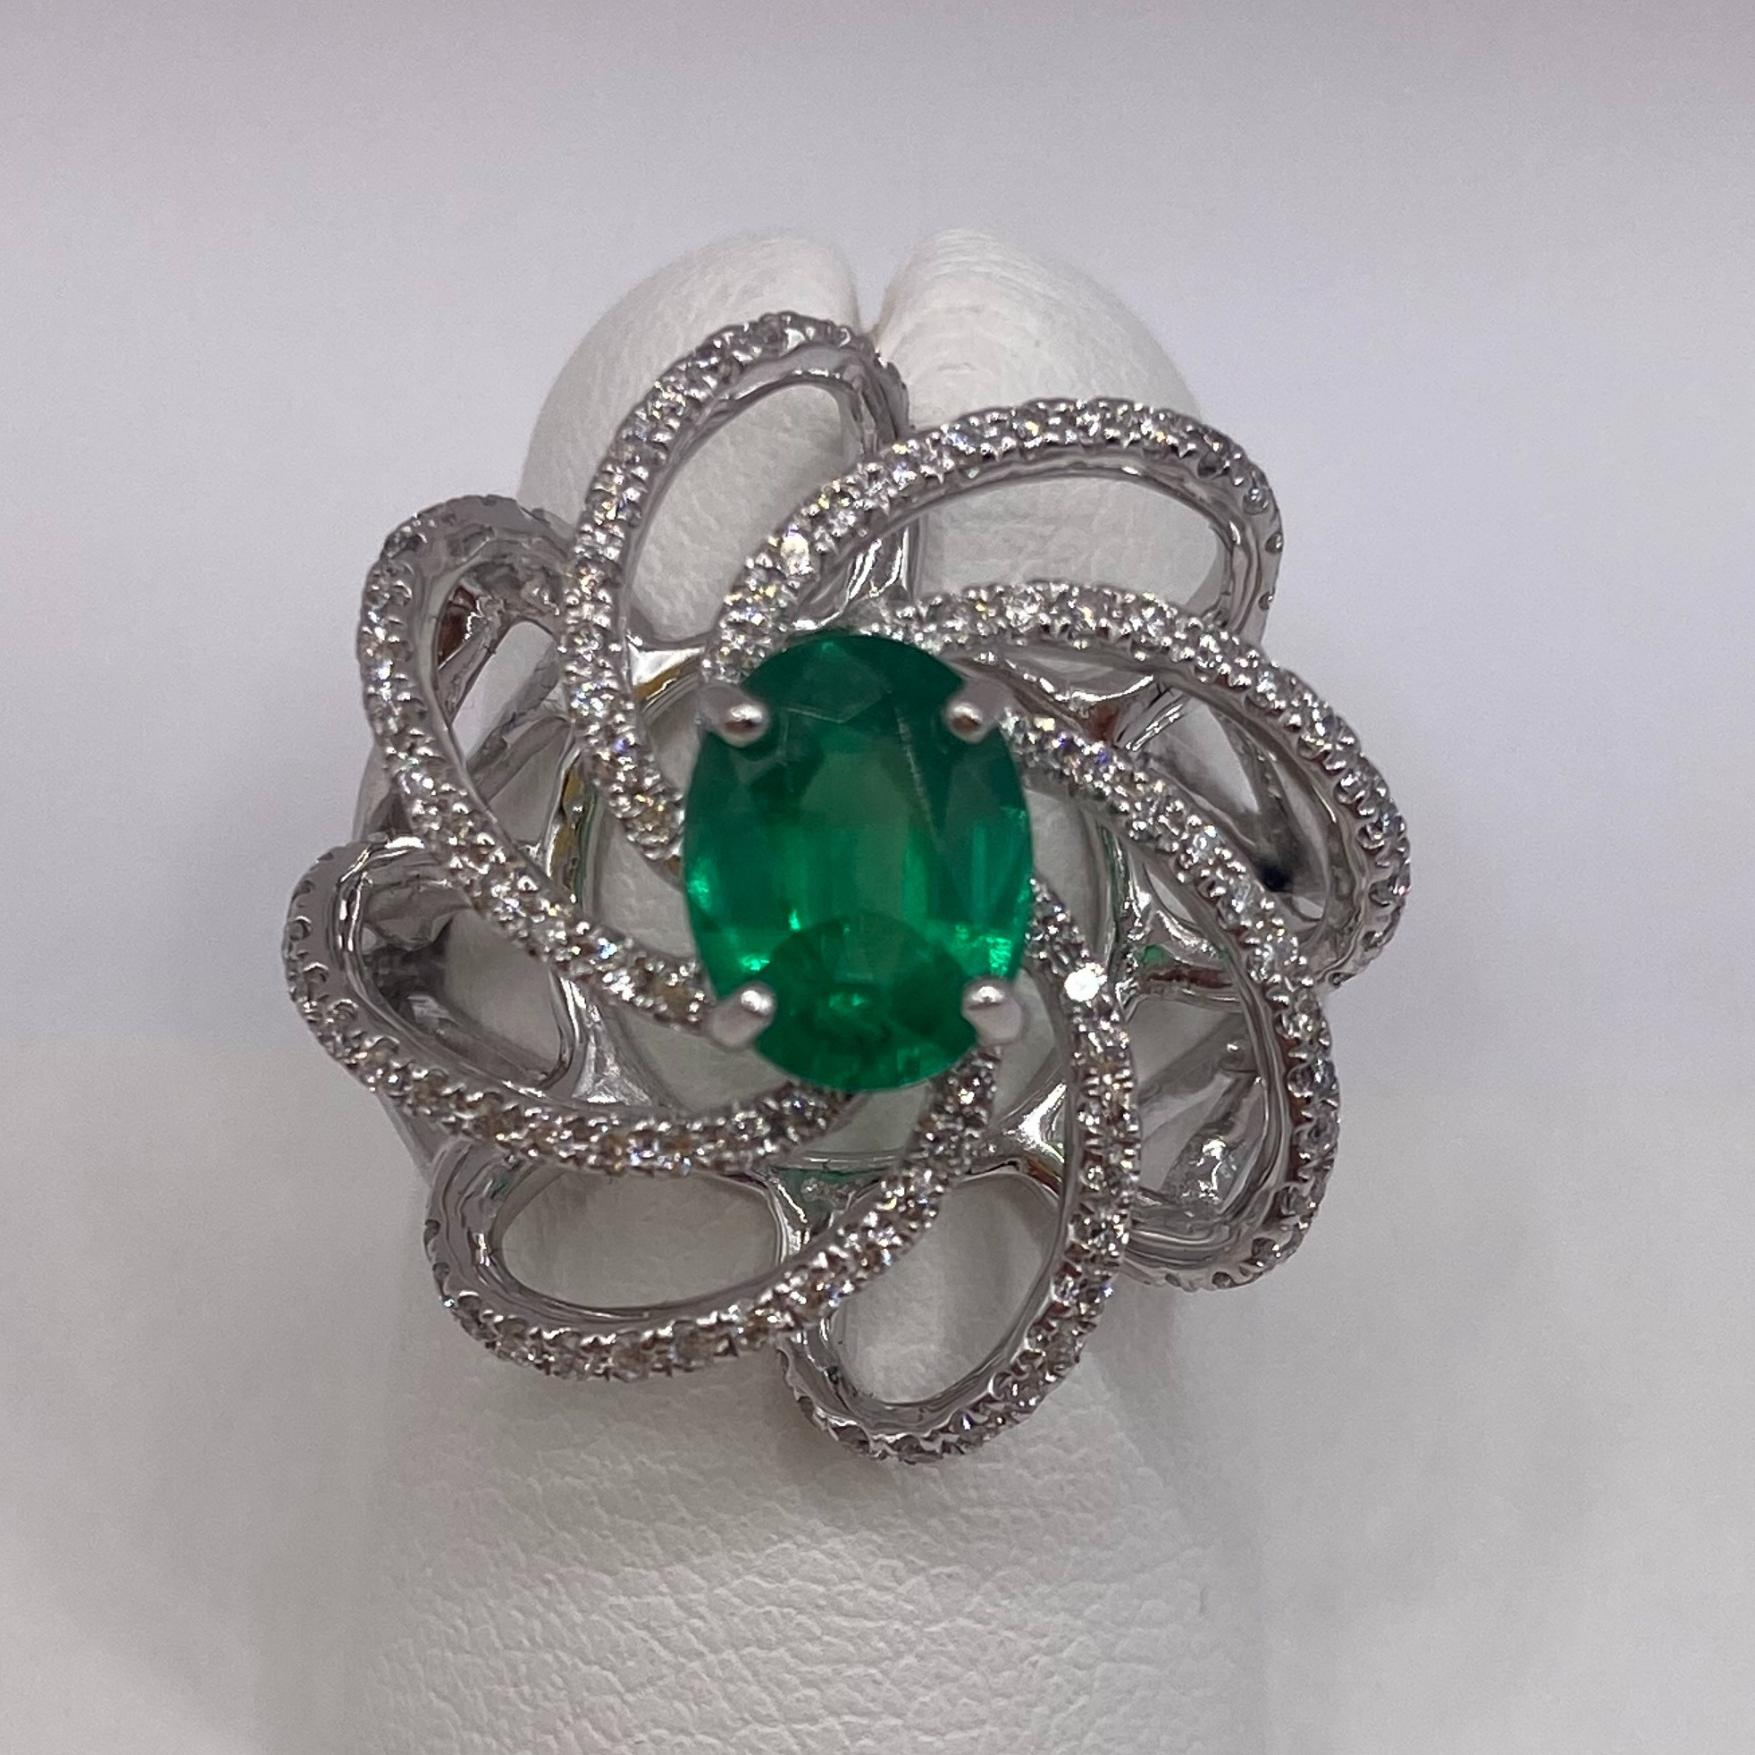 18KT White Gold
Ring Size: 6.5
(Ring is size 6.5, but is sizable upon request)

Number of Oval Emeralds: 1
Carat Weight: 1.13ctw
Stone Size: 8.0 x 6.25mm

Number of Round Diamonds: 108
Carat Weight: 0.48ctw